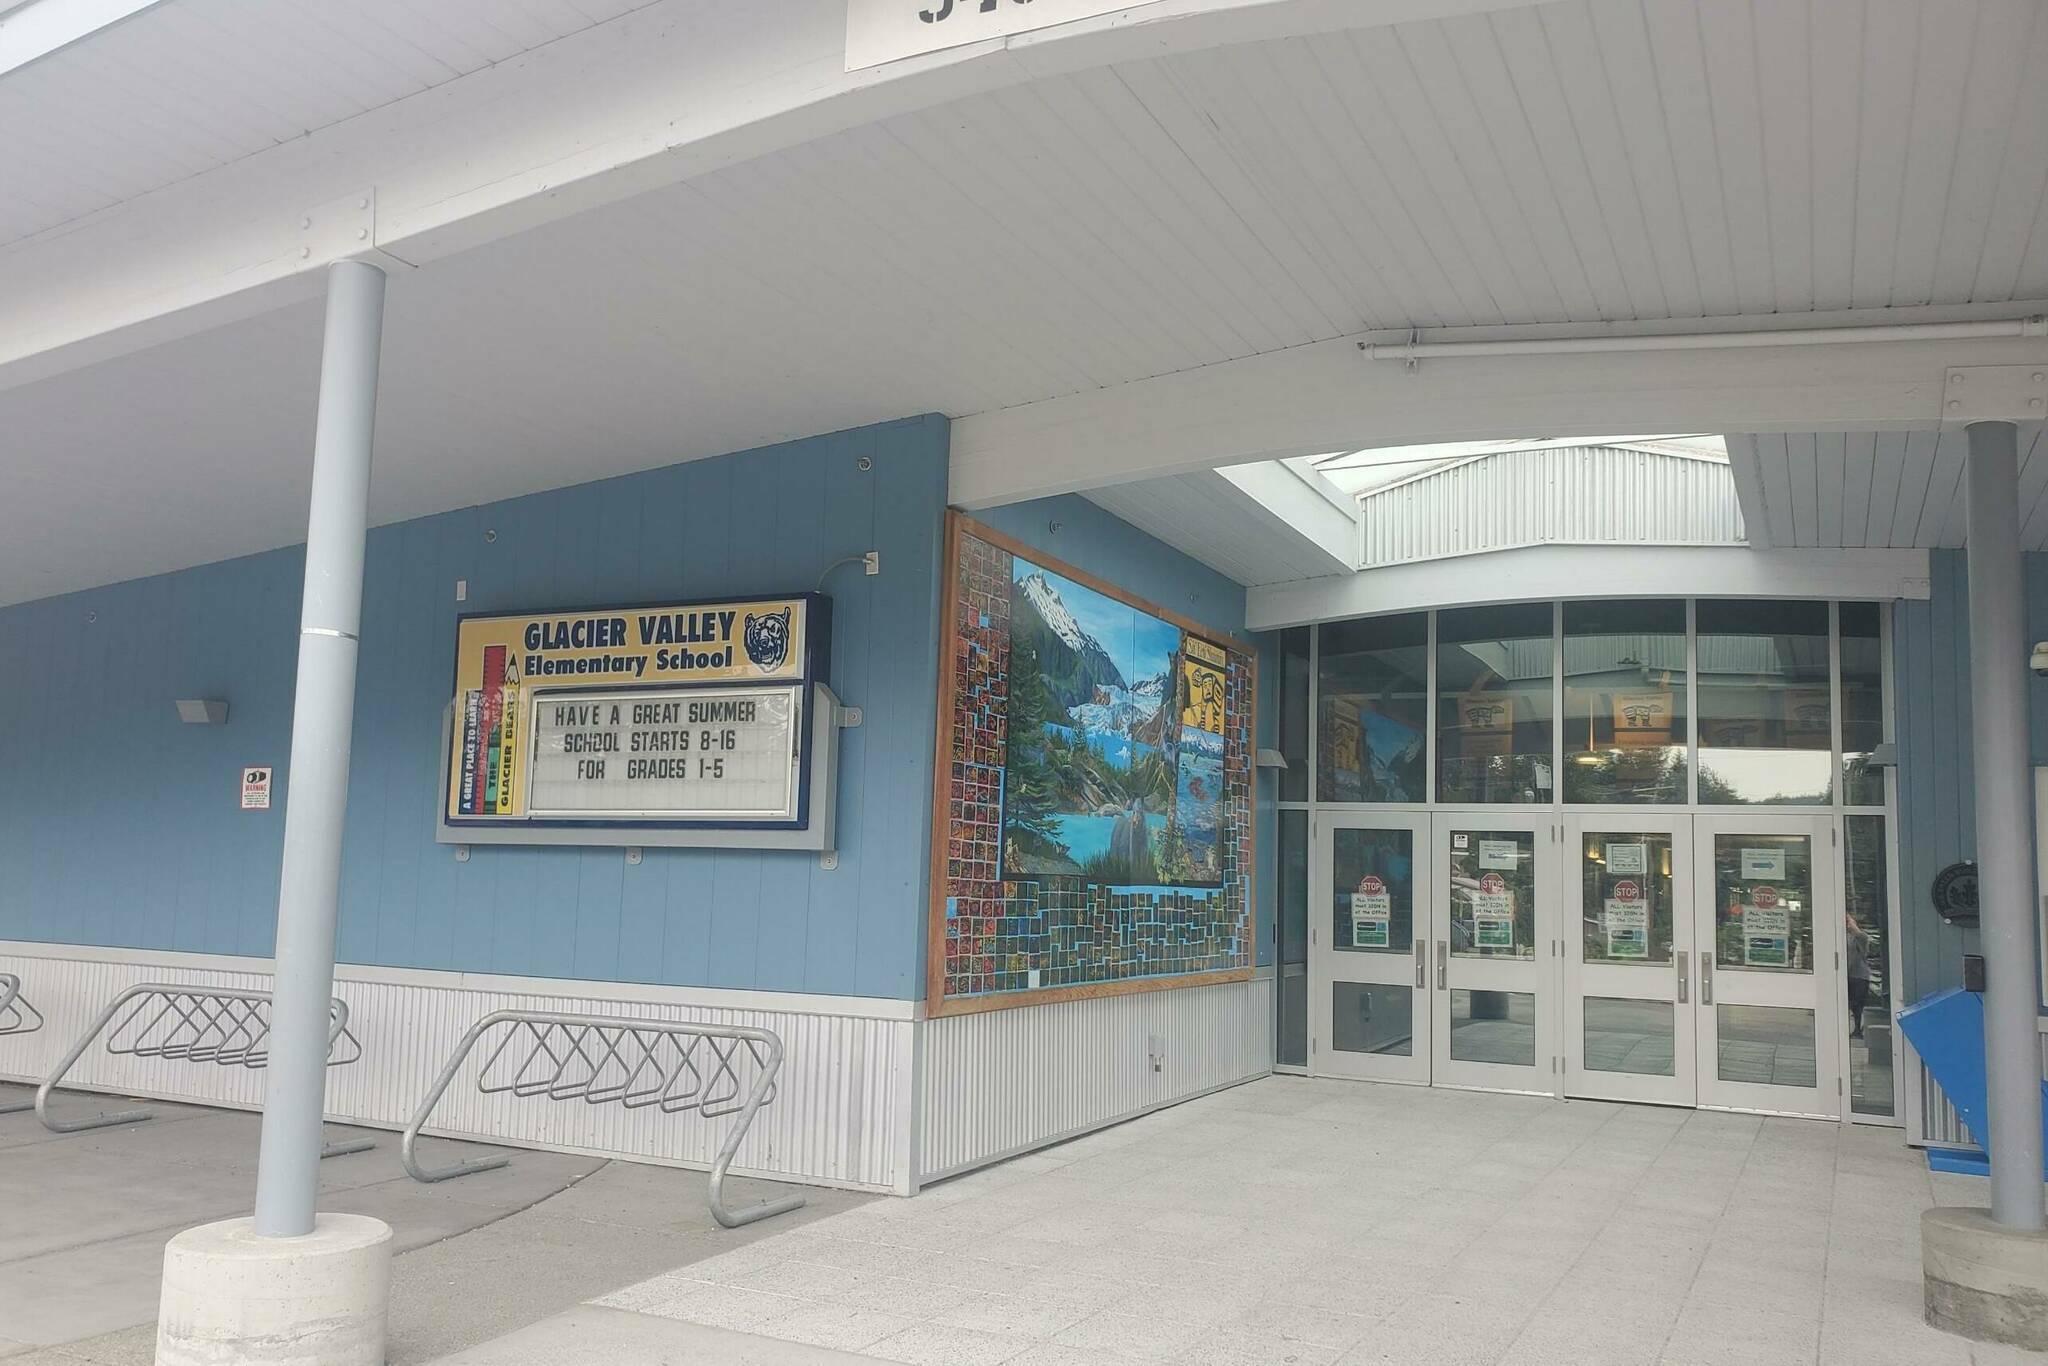 A notice about the arrival of summer is posted outside the entrance to Sitʼ Eeti Shaanáx̱ - Glacier Valley Elementary School. The school’s principal told the Juneau Board of Education last Tuesday there was a 55% “chronically absent” rate during the past school year. (Juneau Empire File)